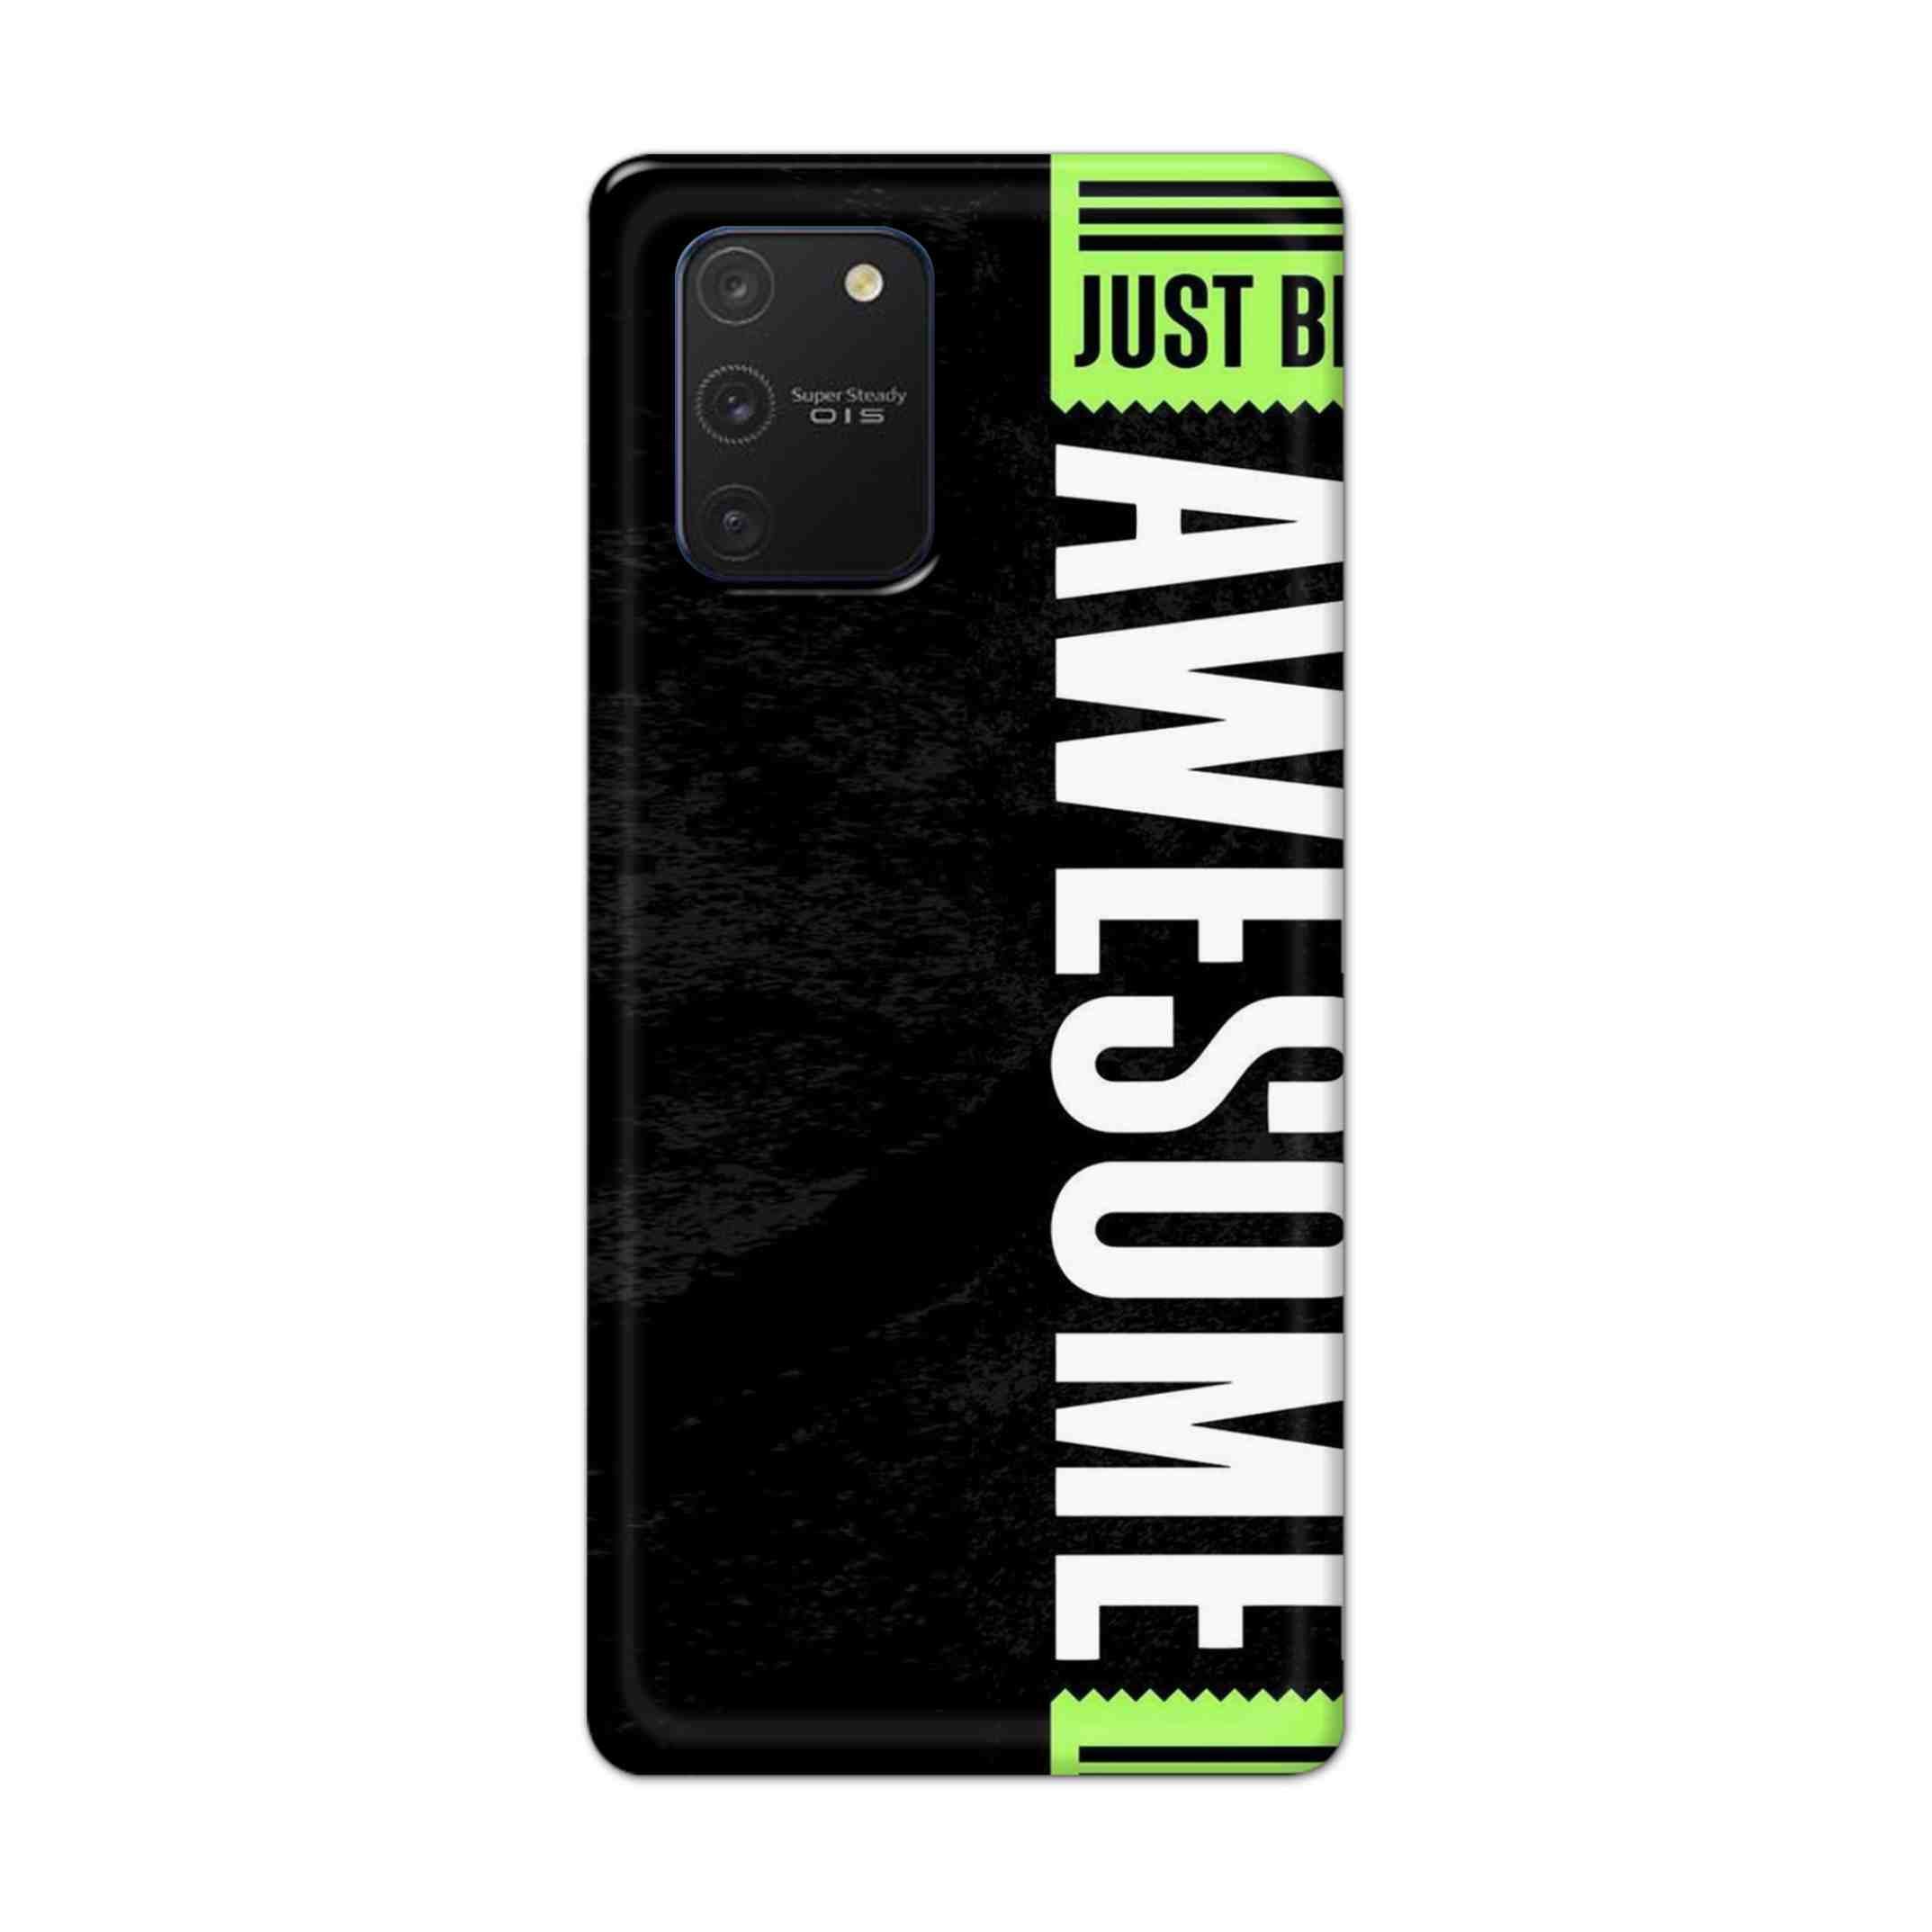 Buy Awesome Street Hard Back Mobile Phone Case Cover For Samsung Galaxy Note 10 Lite (NEW) Online